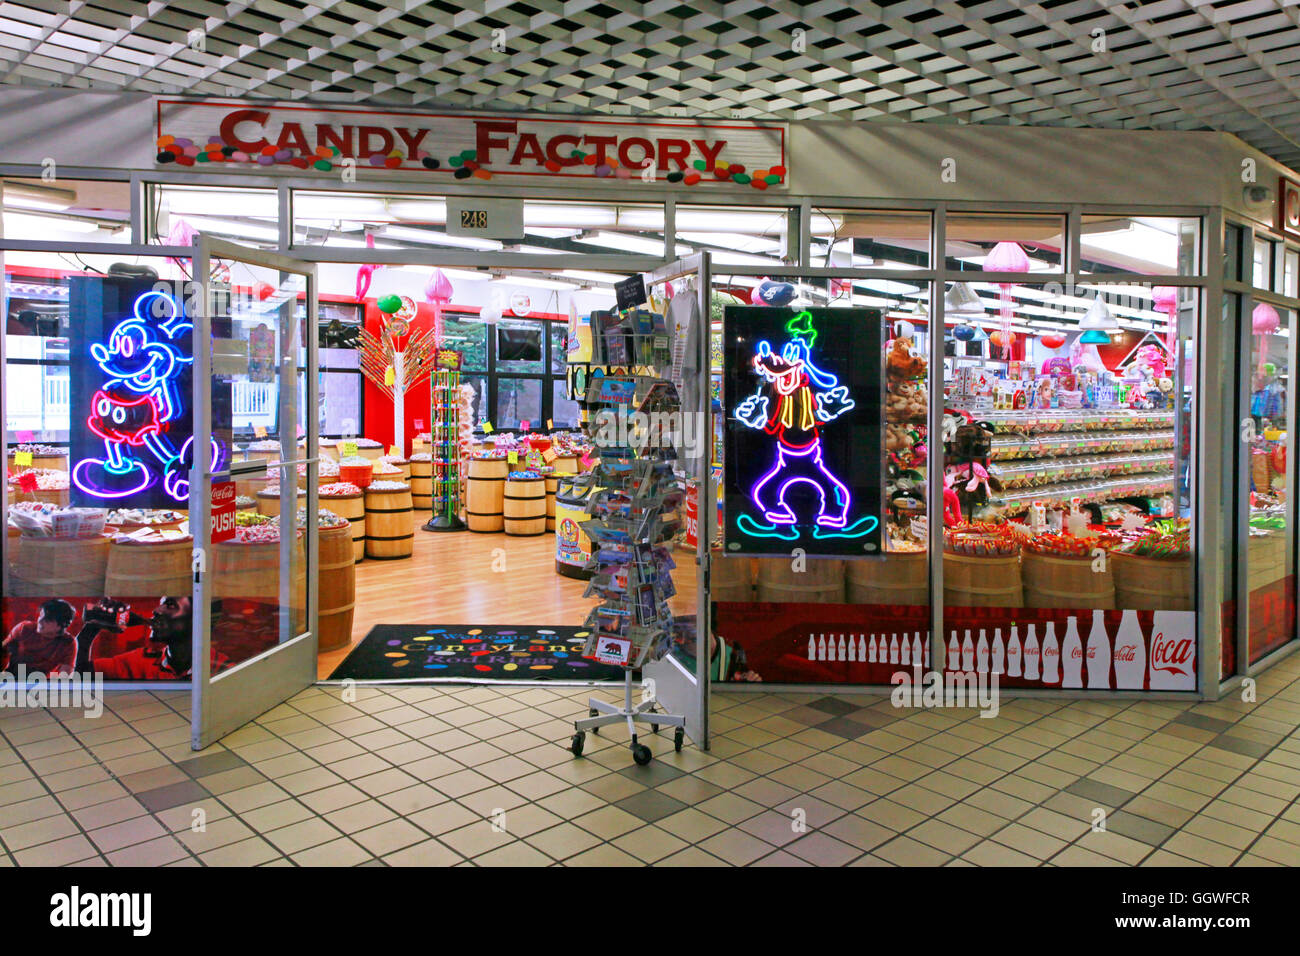 CANDY FACTORY in a mall on CANNERY ROW - MONTEREY, CALIFORINA Stock Photo